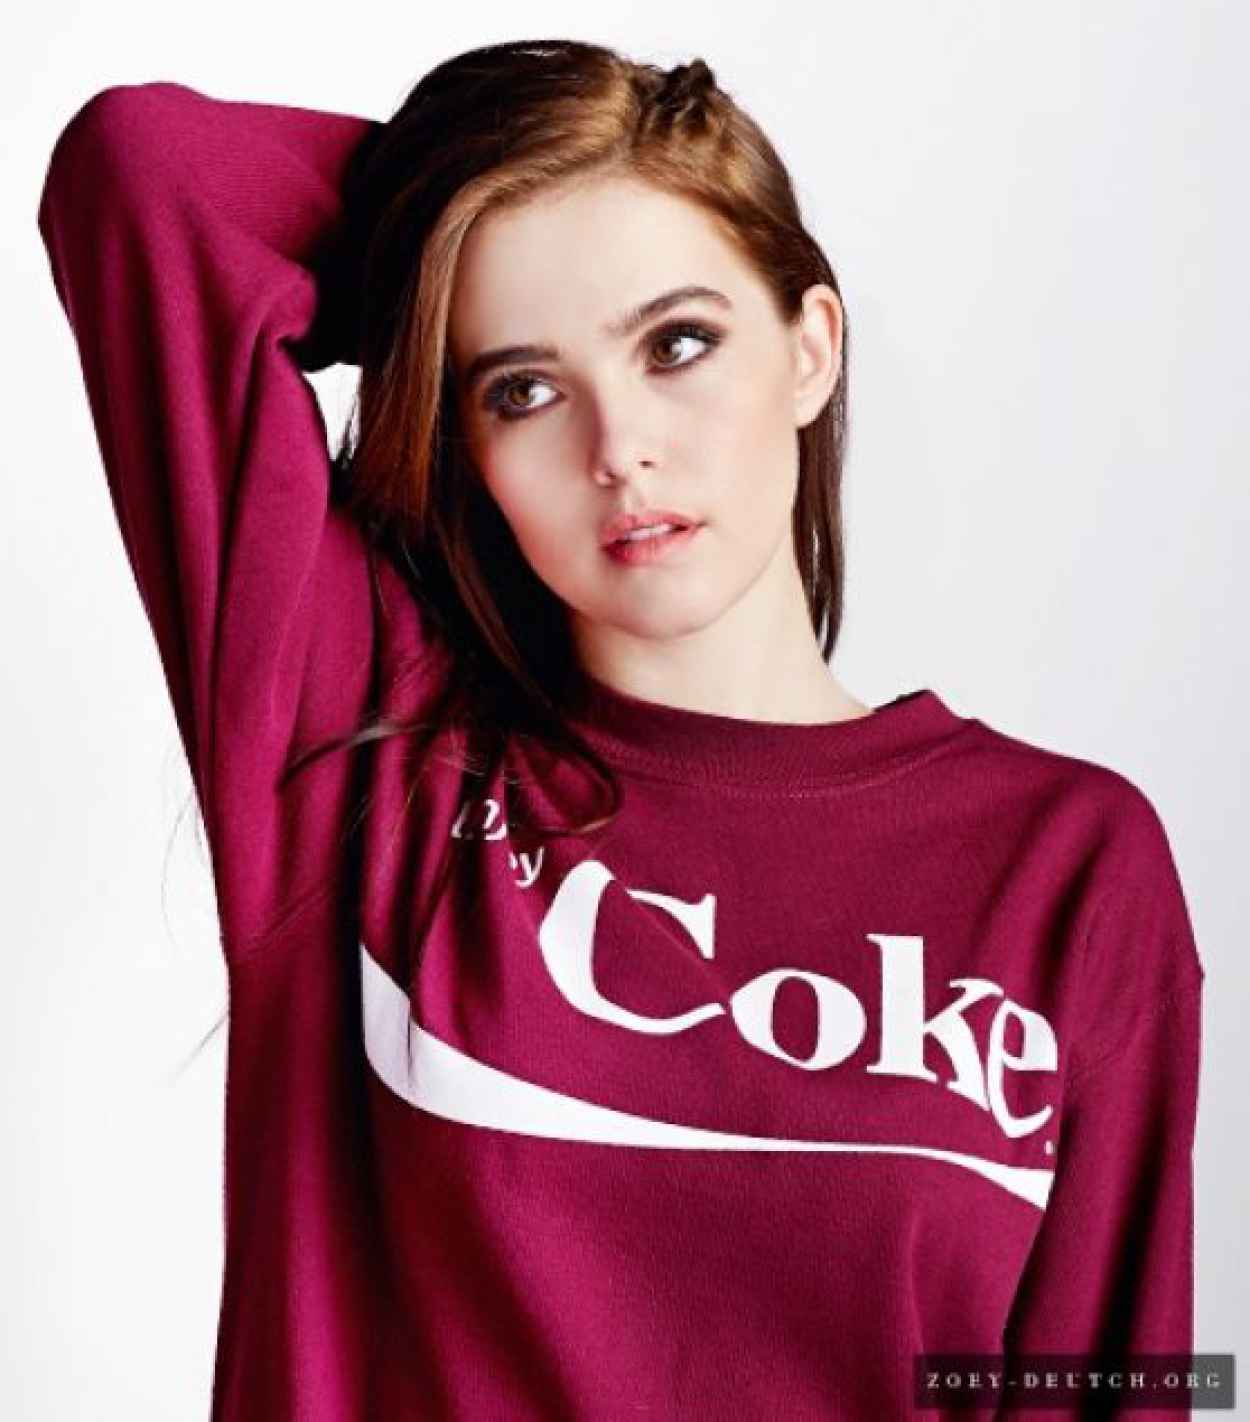 Zoey Deutch Photoshoot for Who What Wear 2015 Campaign-1